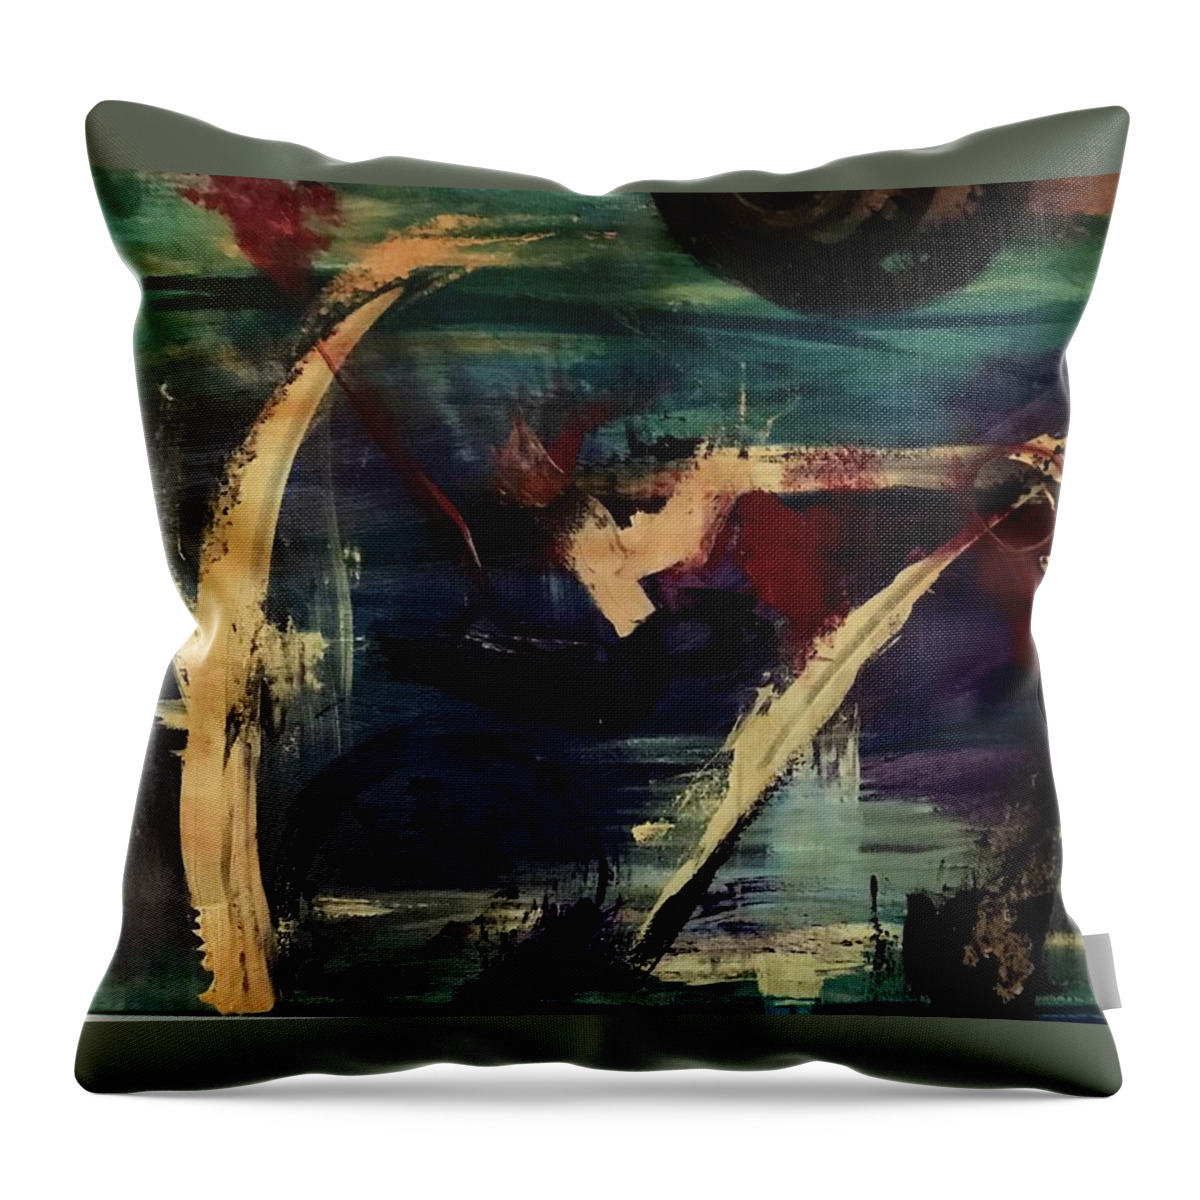 Painting Throw Pillow featuring the painting Dazed by Laura Jaffe